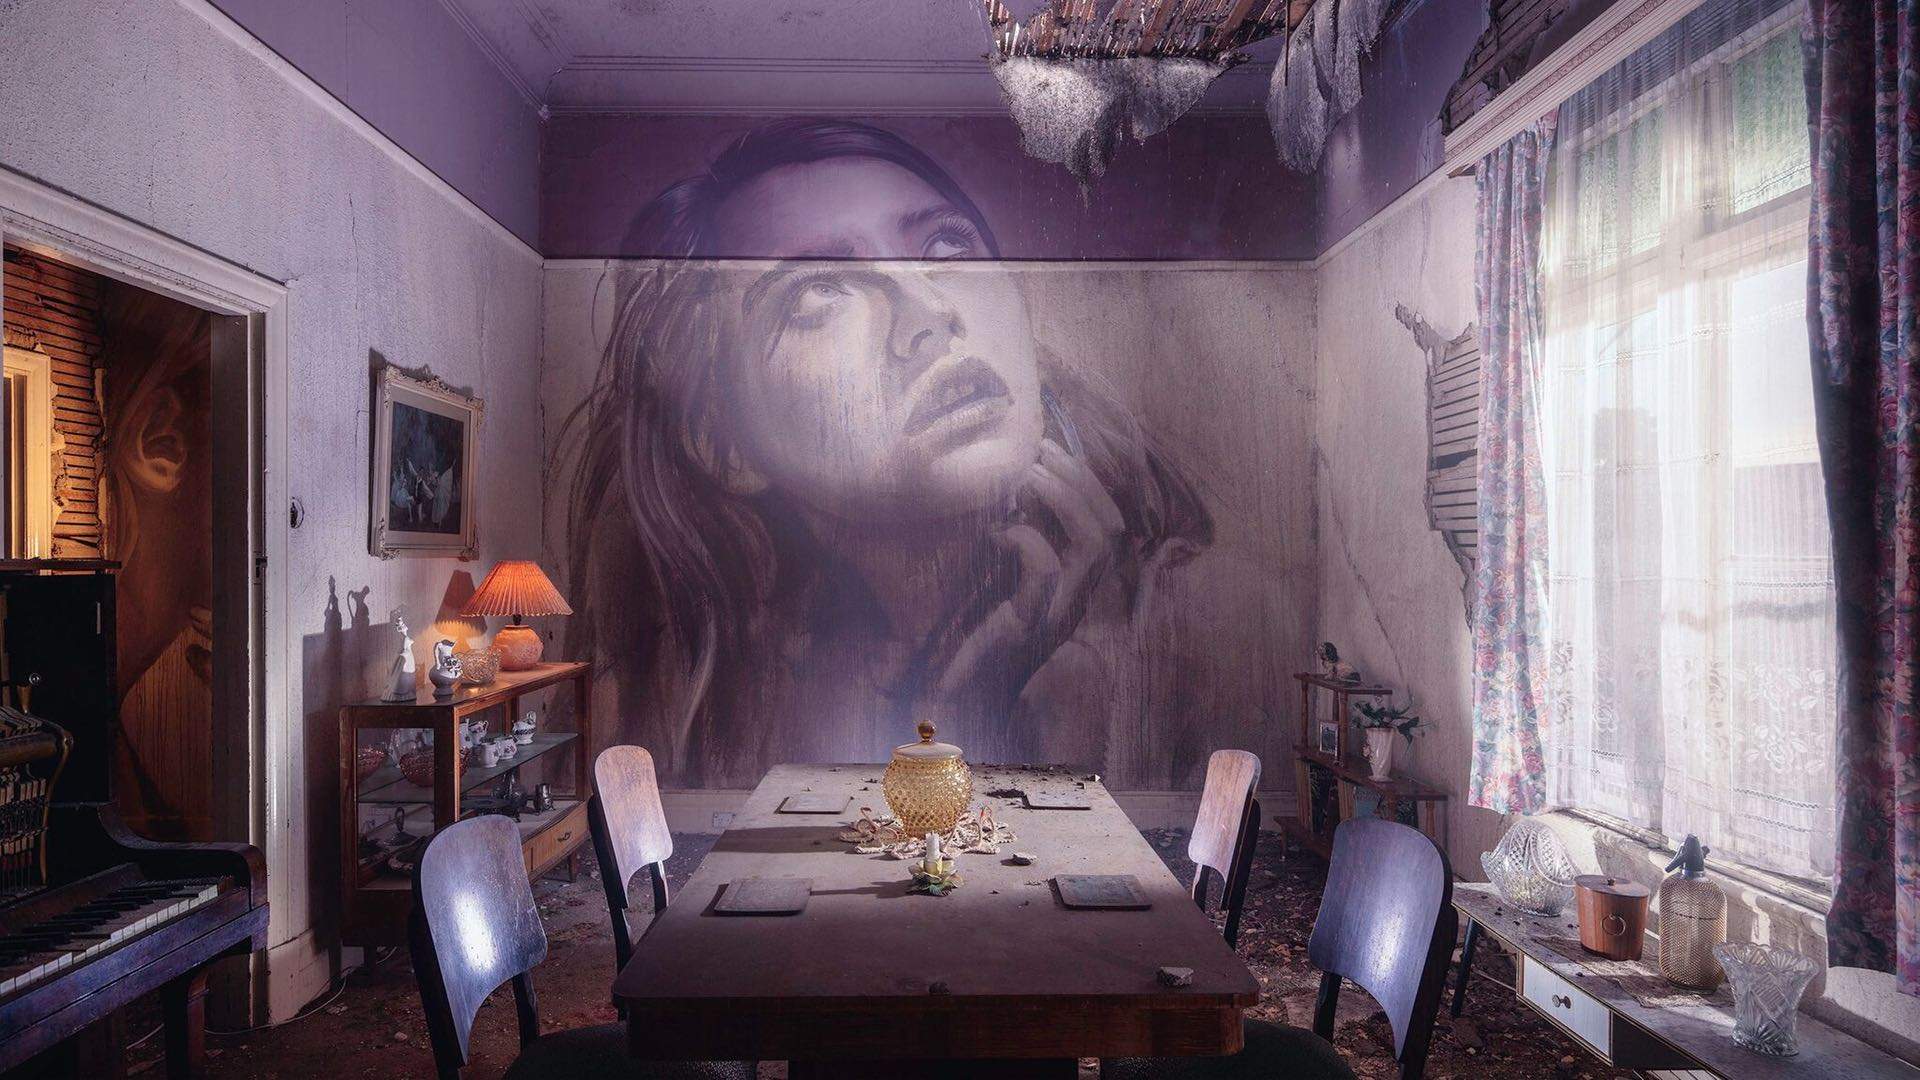 This New Street Art Exhibition Takes Place in an Abandoned Melbourne House